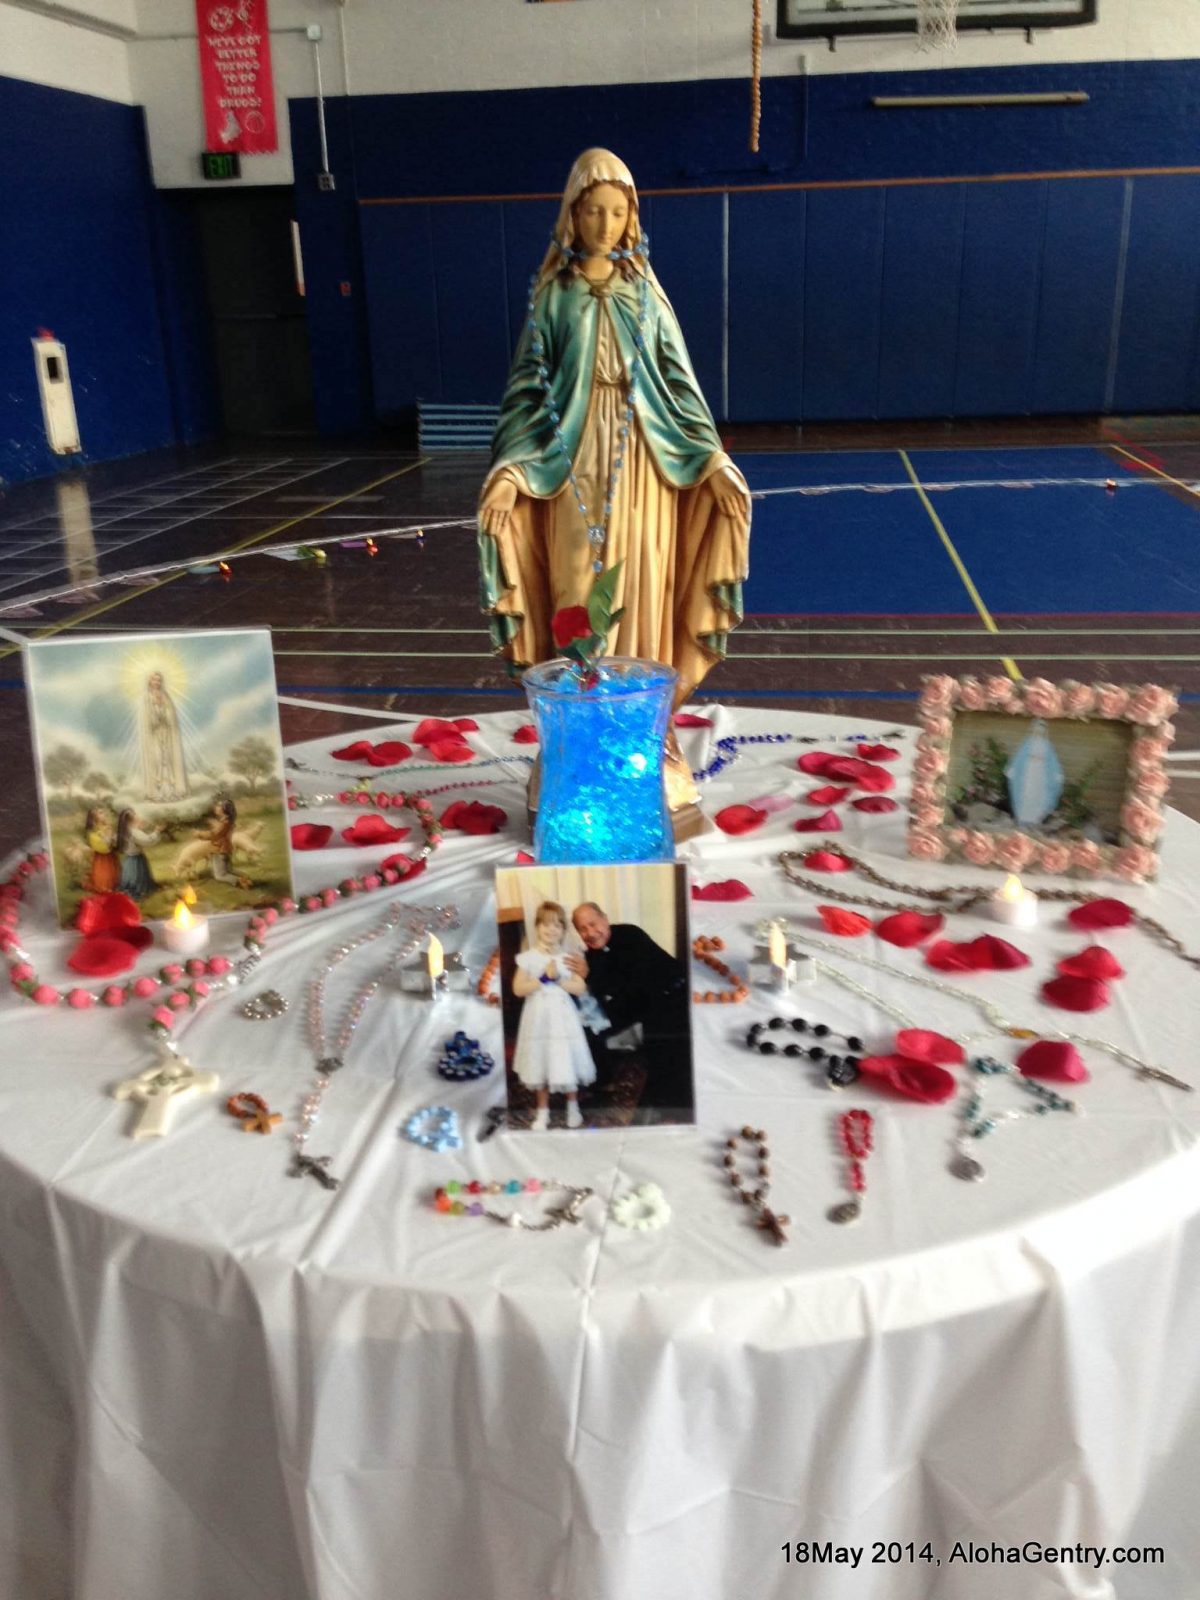 Today’s Living Rosary in Corning, New York